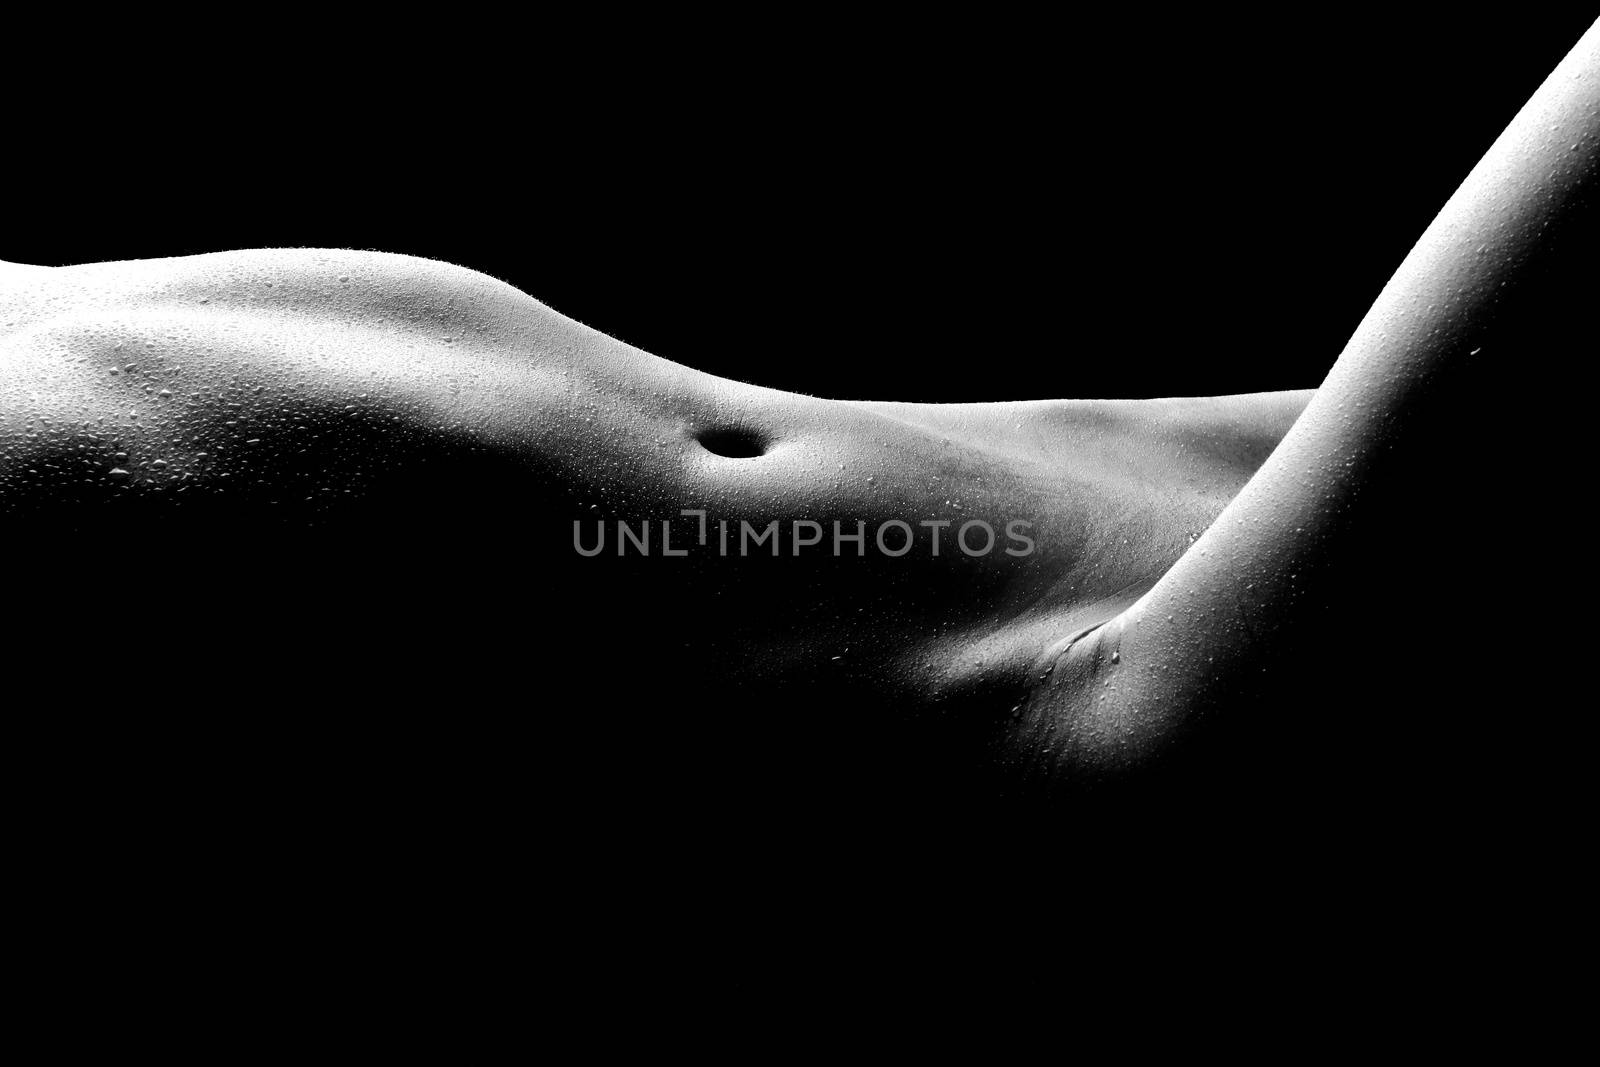 Bodyscape Image of a Nude Woman